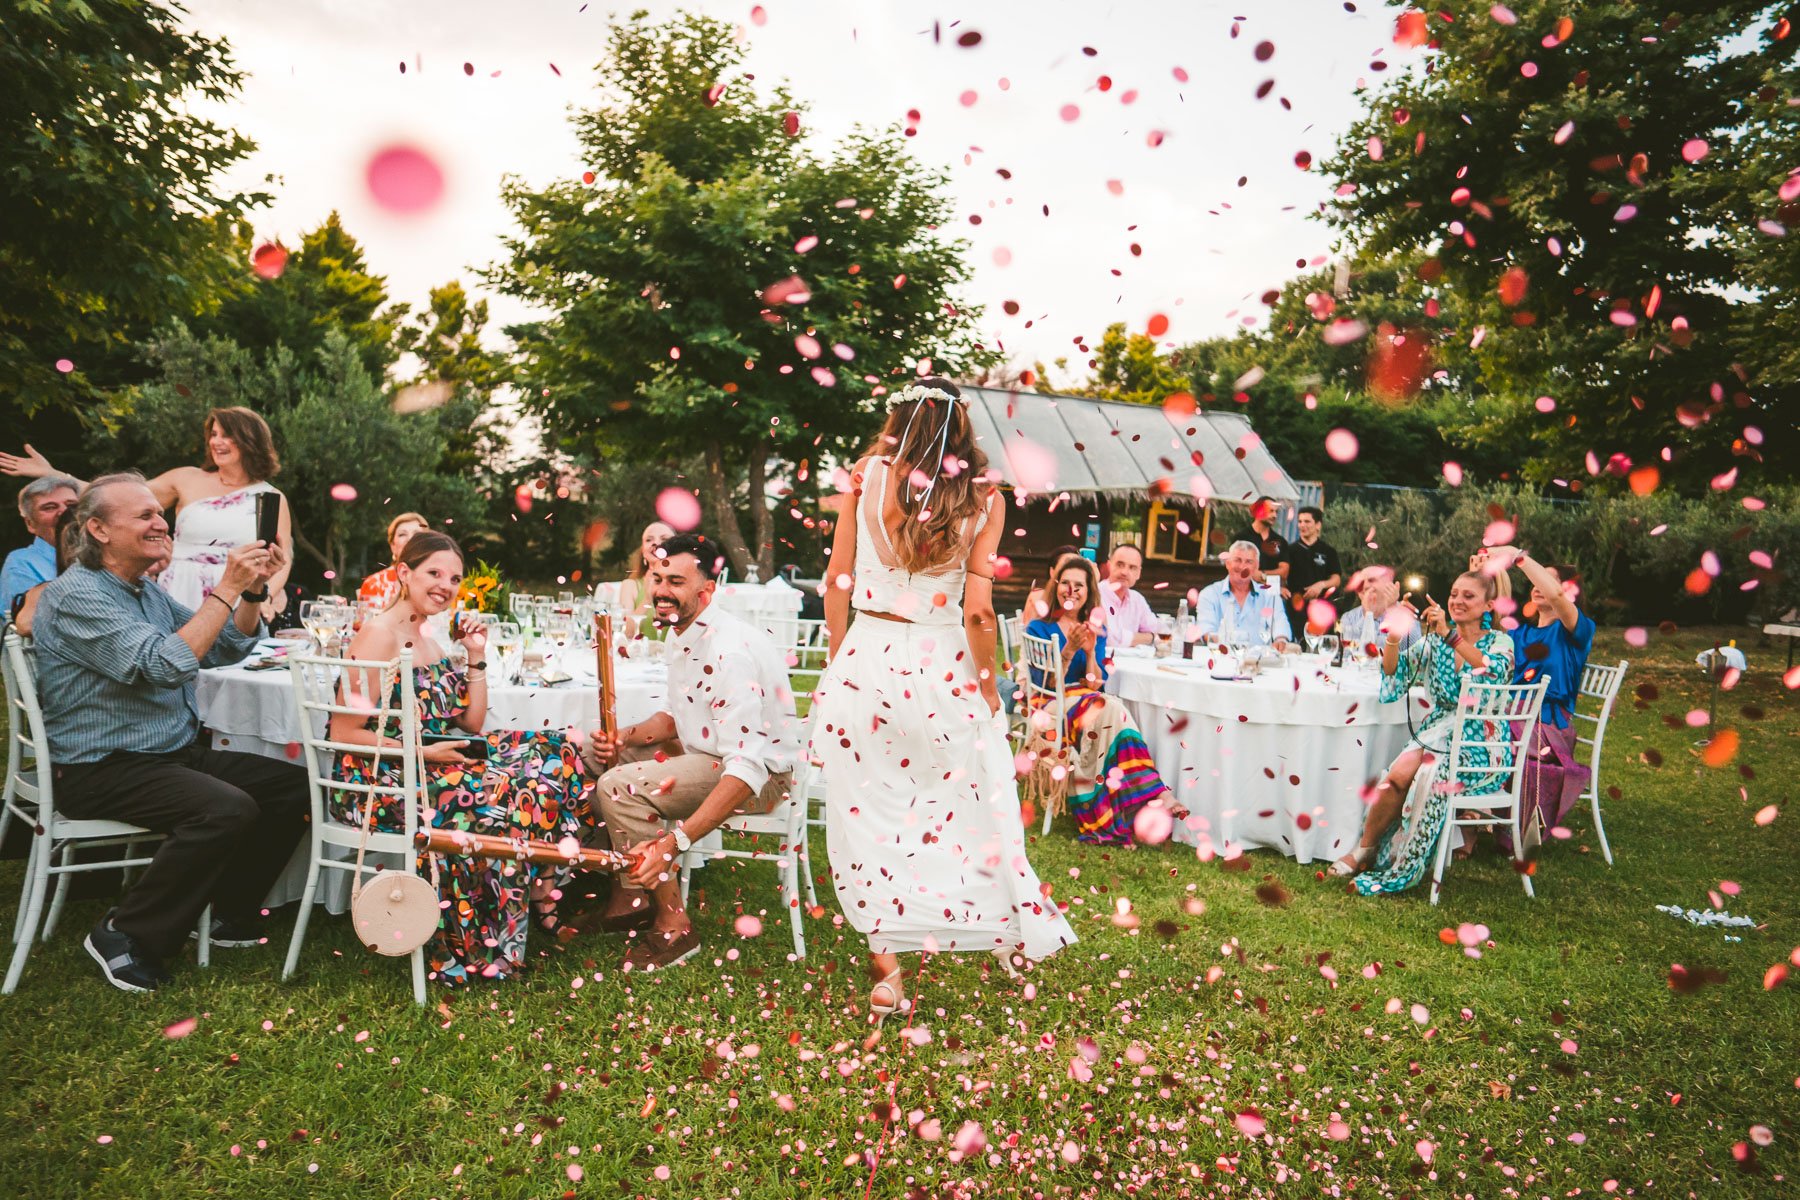  As the sun sets on the horizon, casting a warm glow over the landscape, a beautiful civil marriage ceremony takes place. The bride stands with her back to the camera, her white dress contrasting beautifully with the vibrant confetti that surrounds h